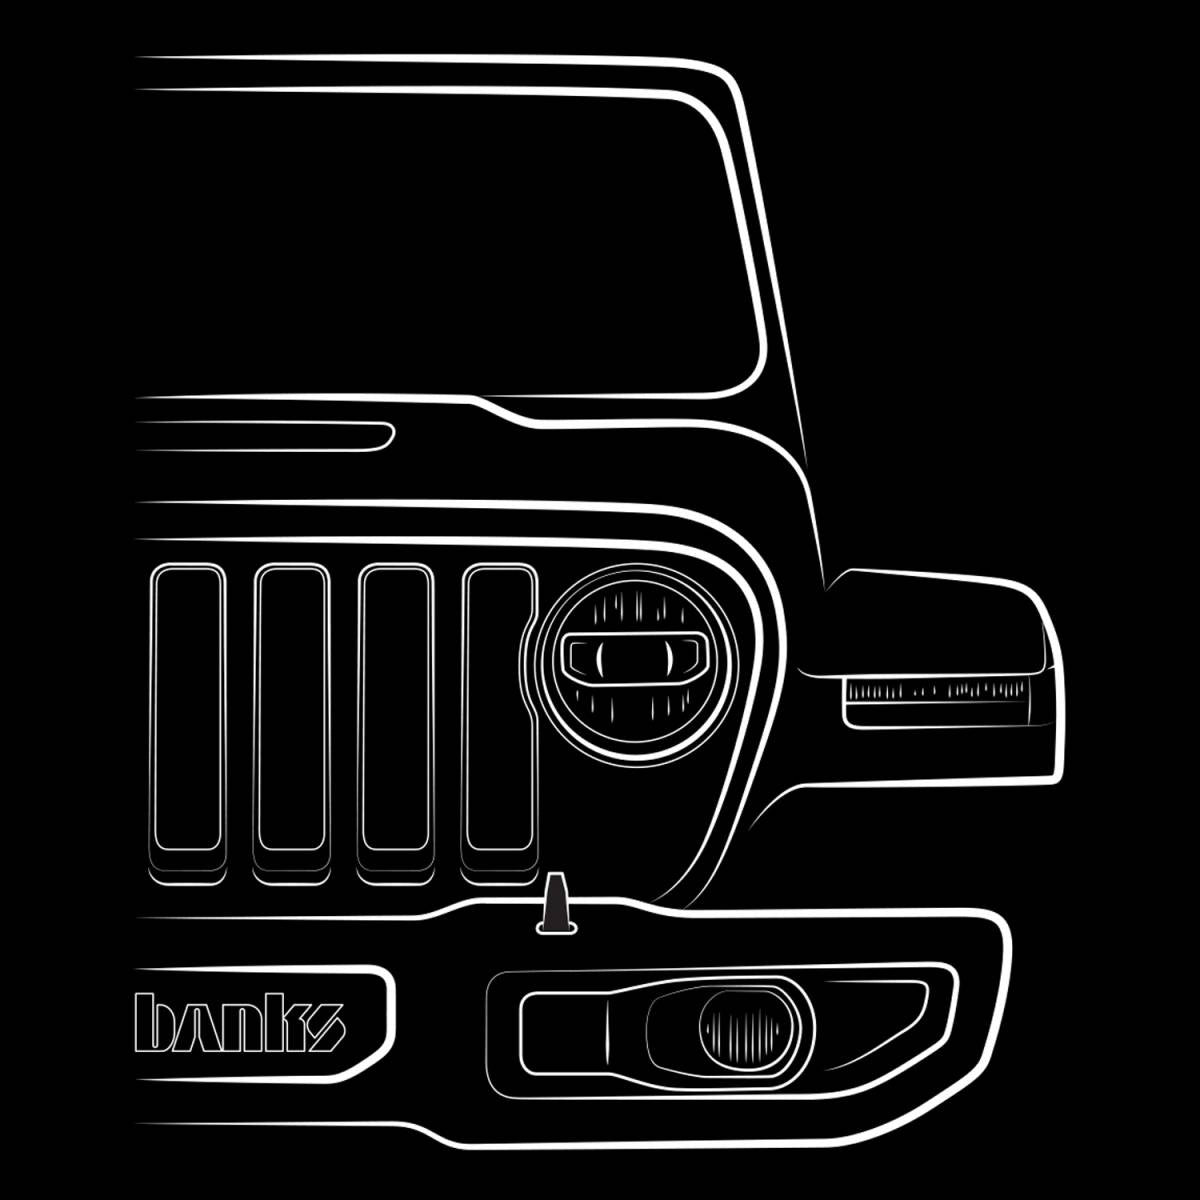 Banks Jeep Face Graphic Detail 96289